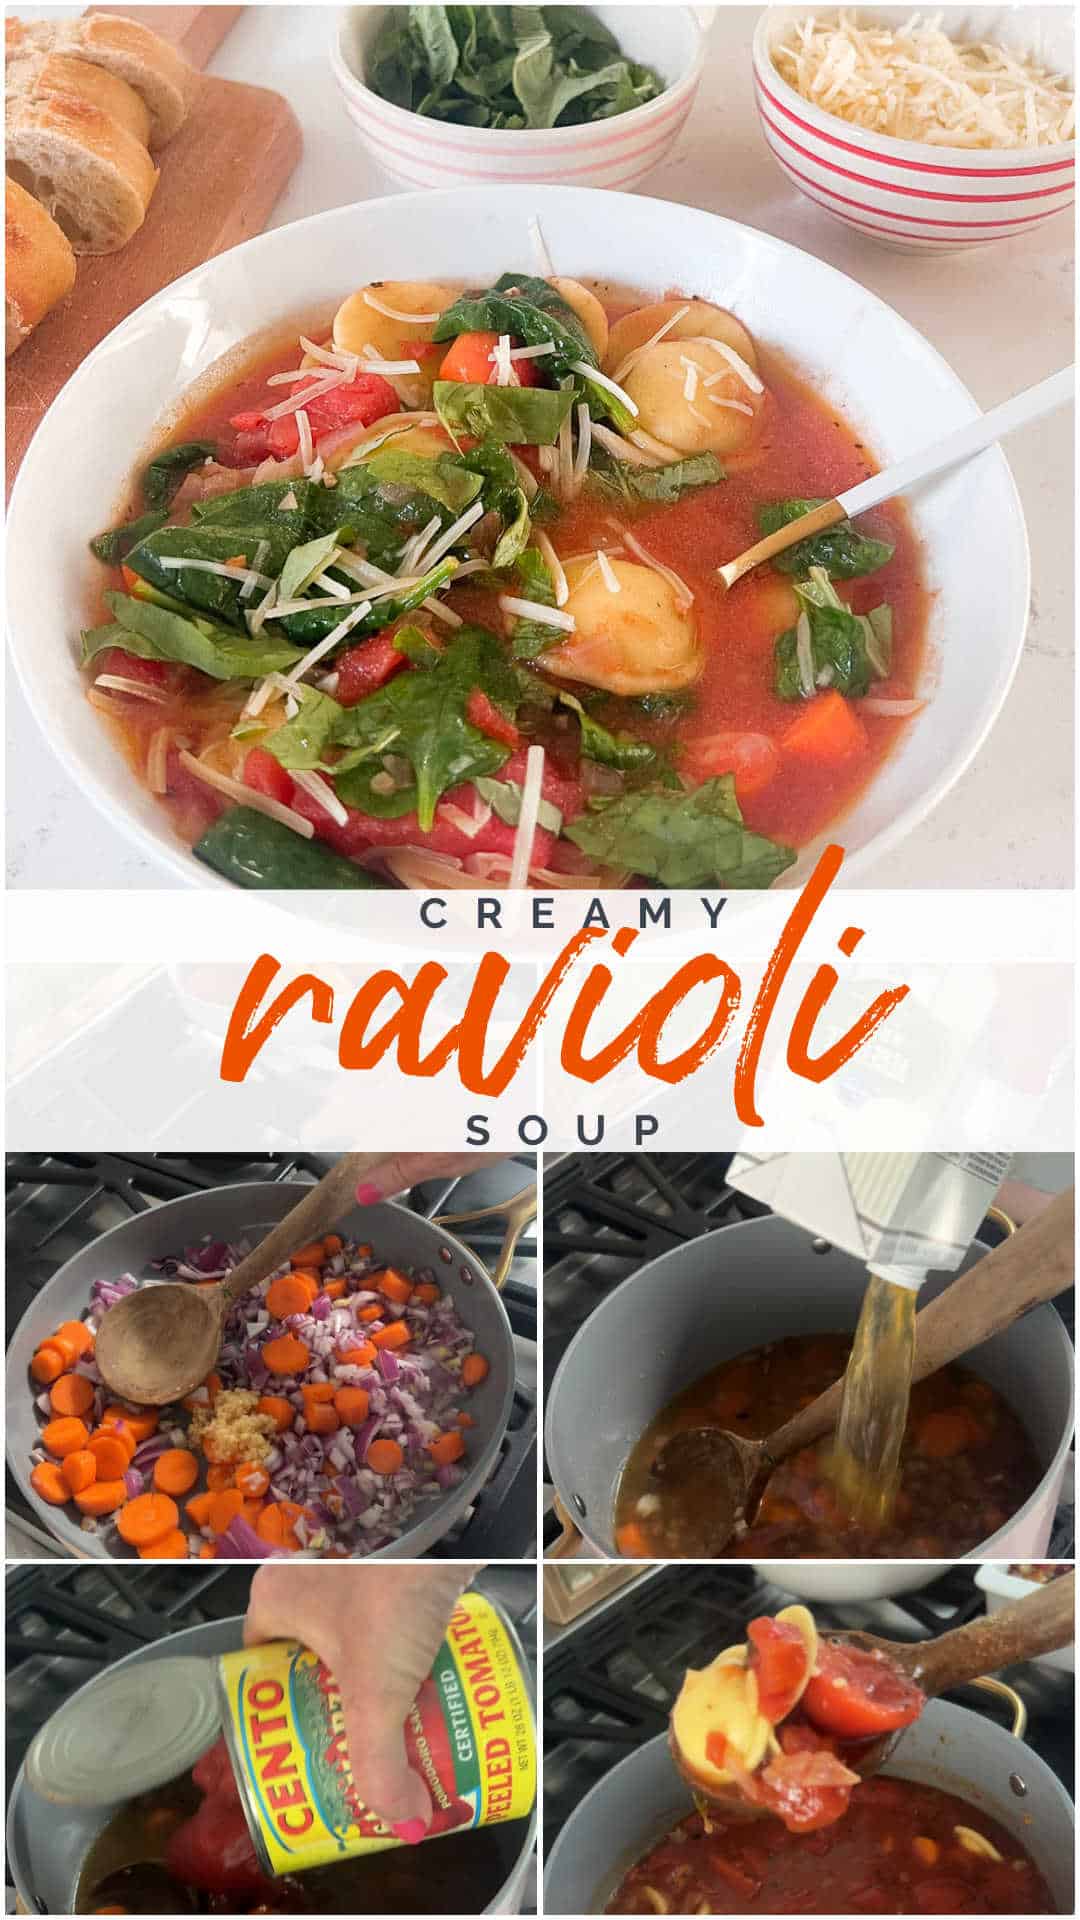 Creamy Ravioli Soup: Year-Round Comfort. A comforting one-pot dish featuring cheese-filled ravioli in a creamy tomato and vegetable broth, perfect for any season and ready in under 30 minutes.